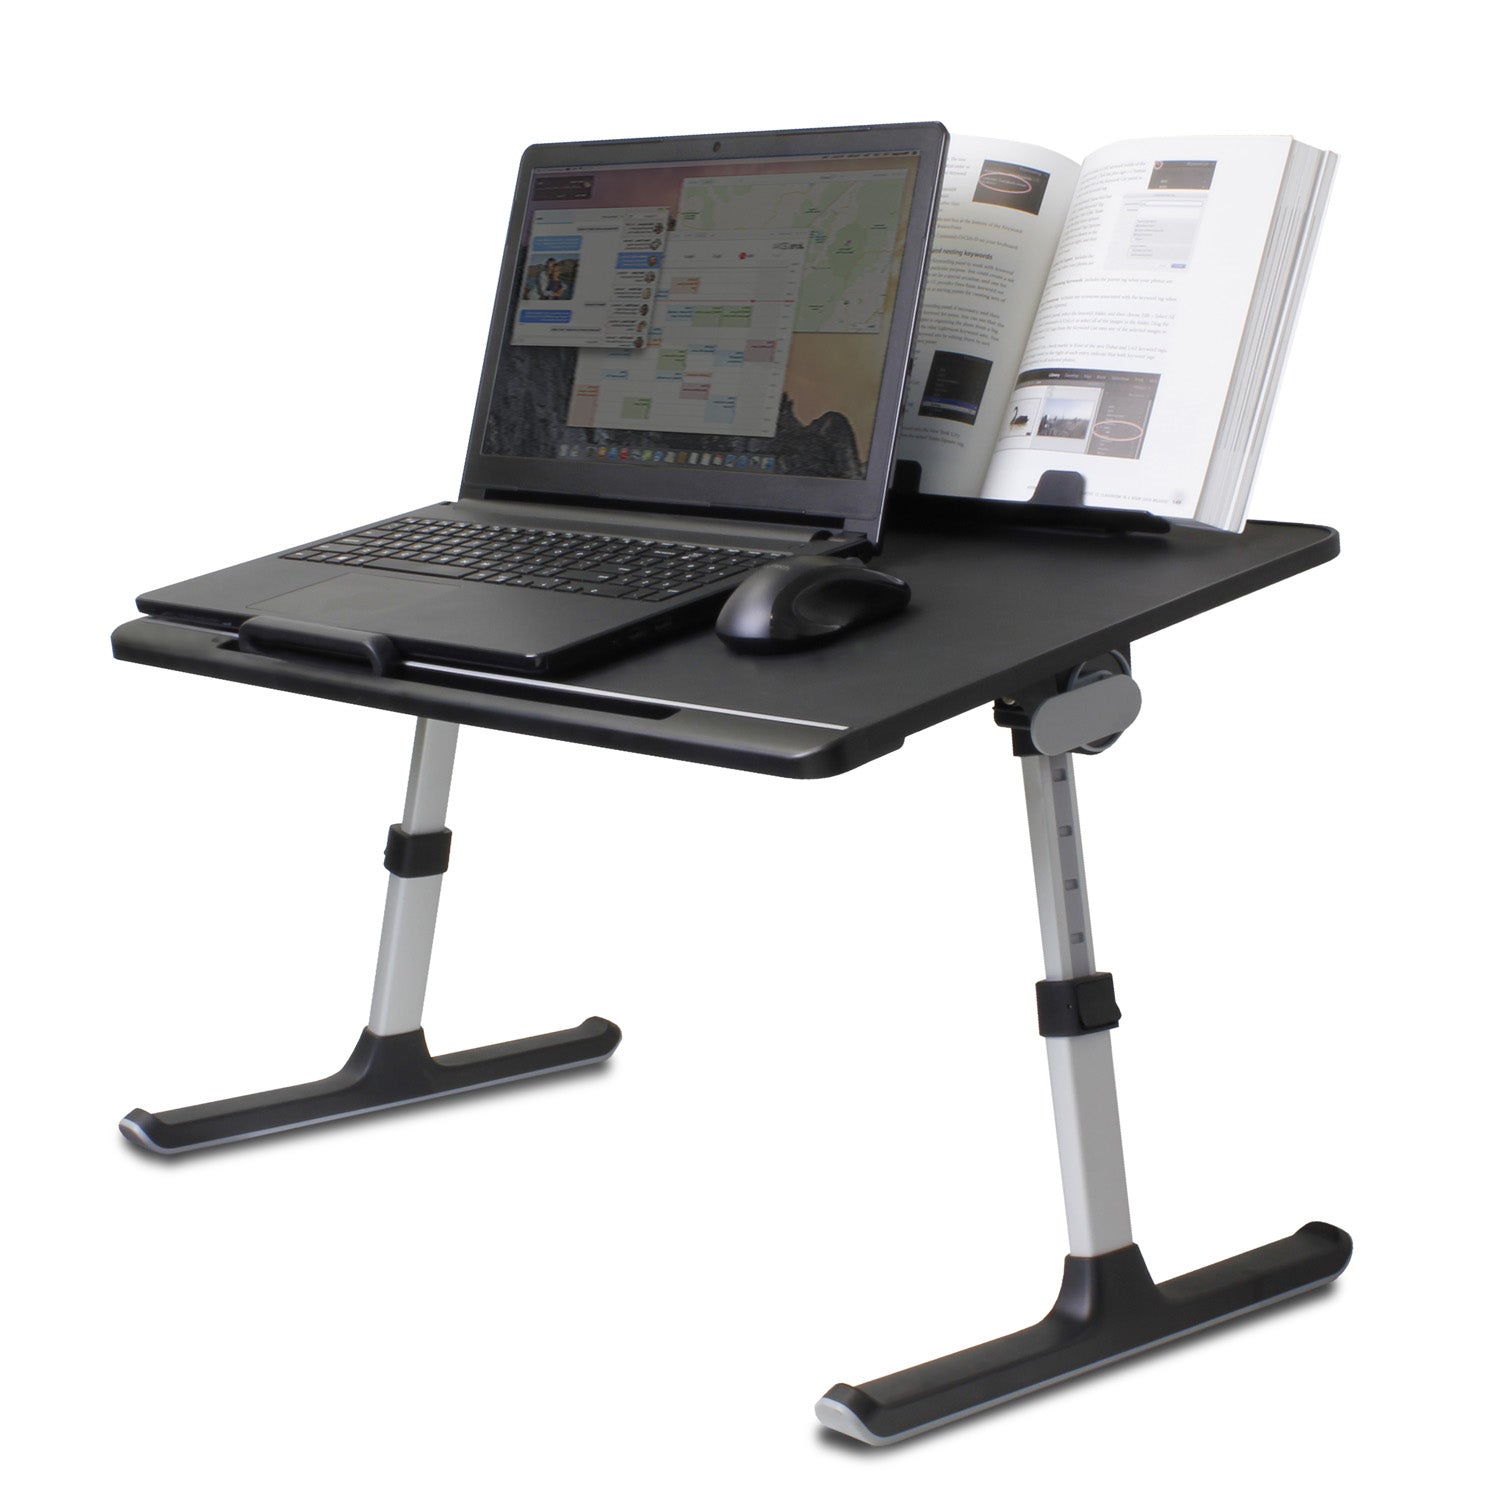 Adjustable non-slip Laptop Stand/Table with Drawer and Book Holder